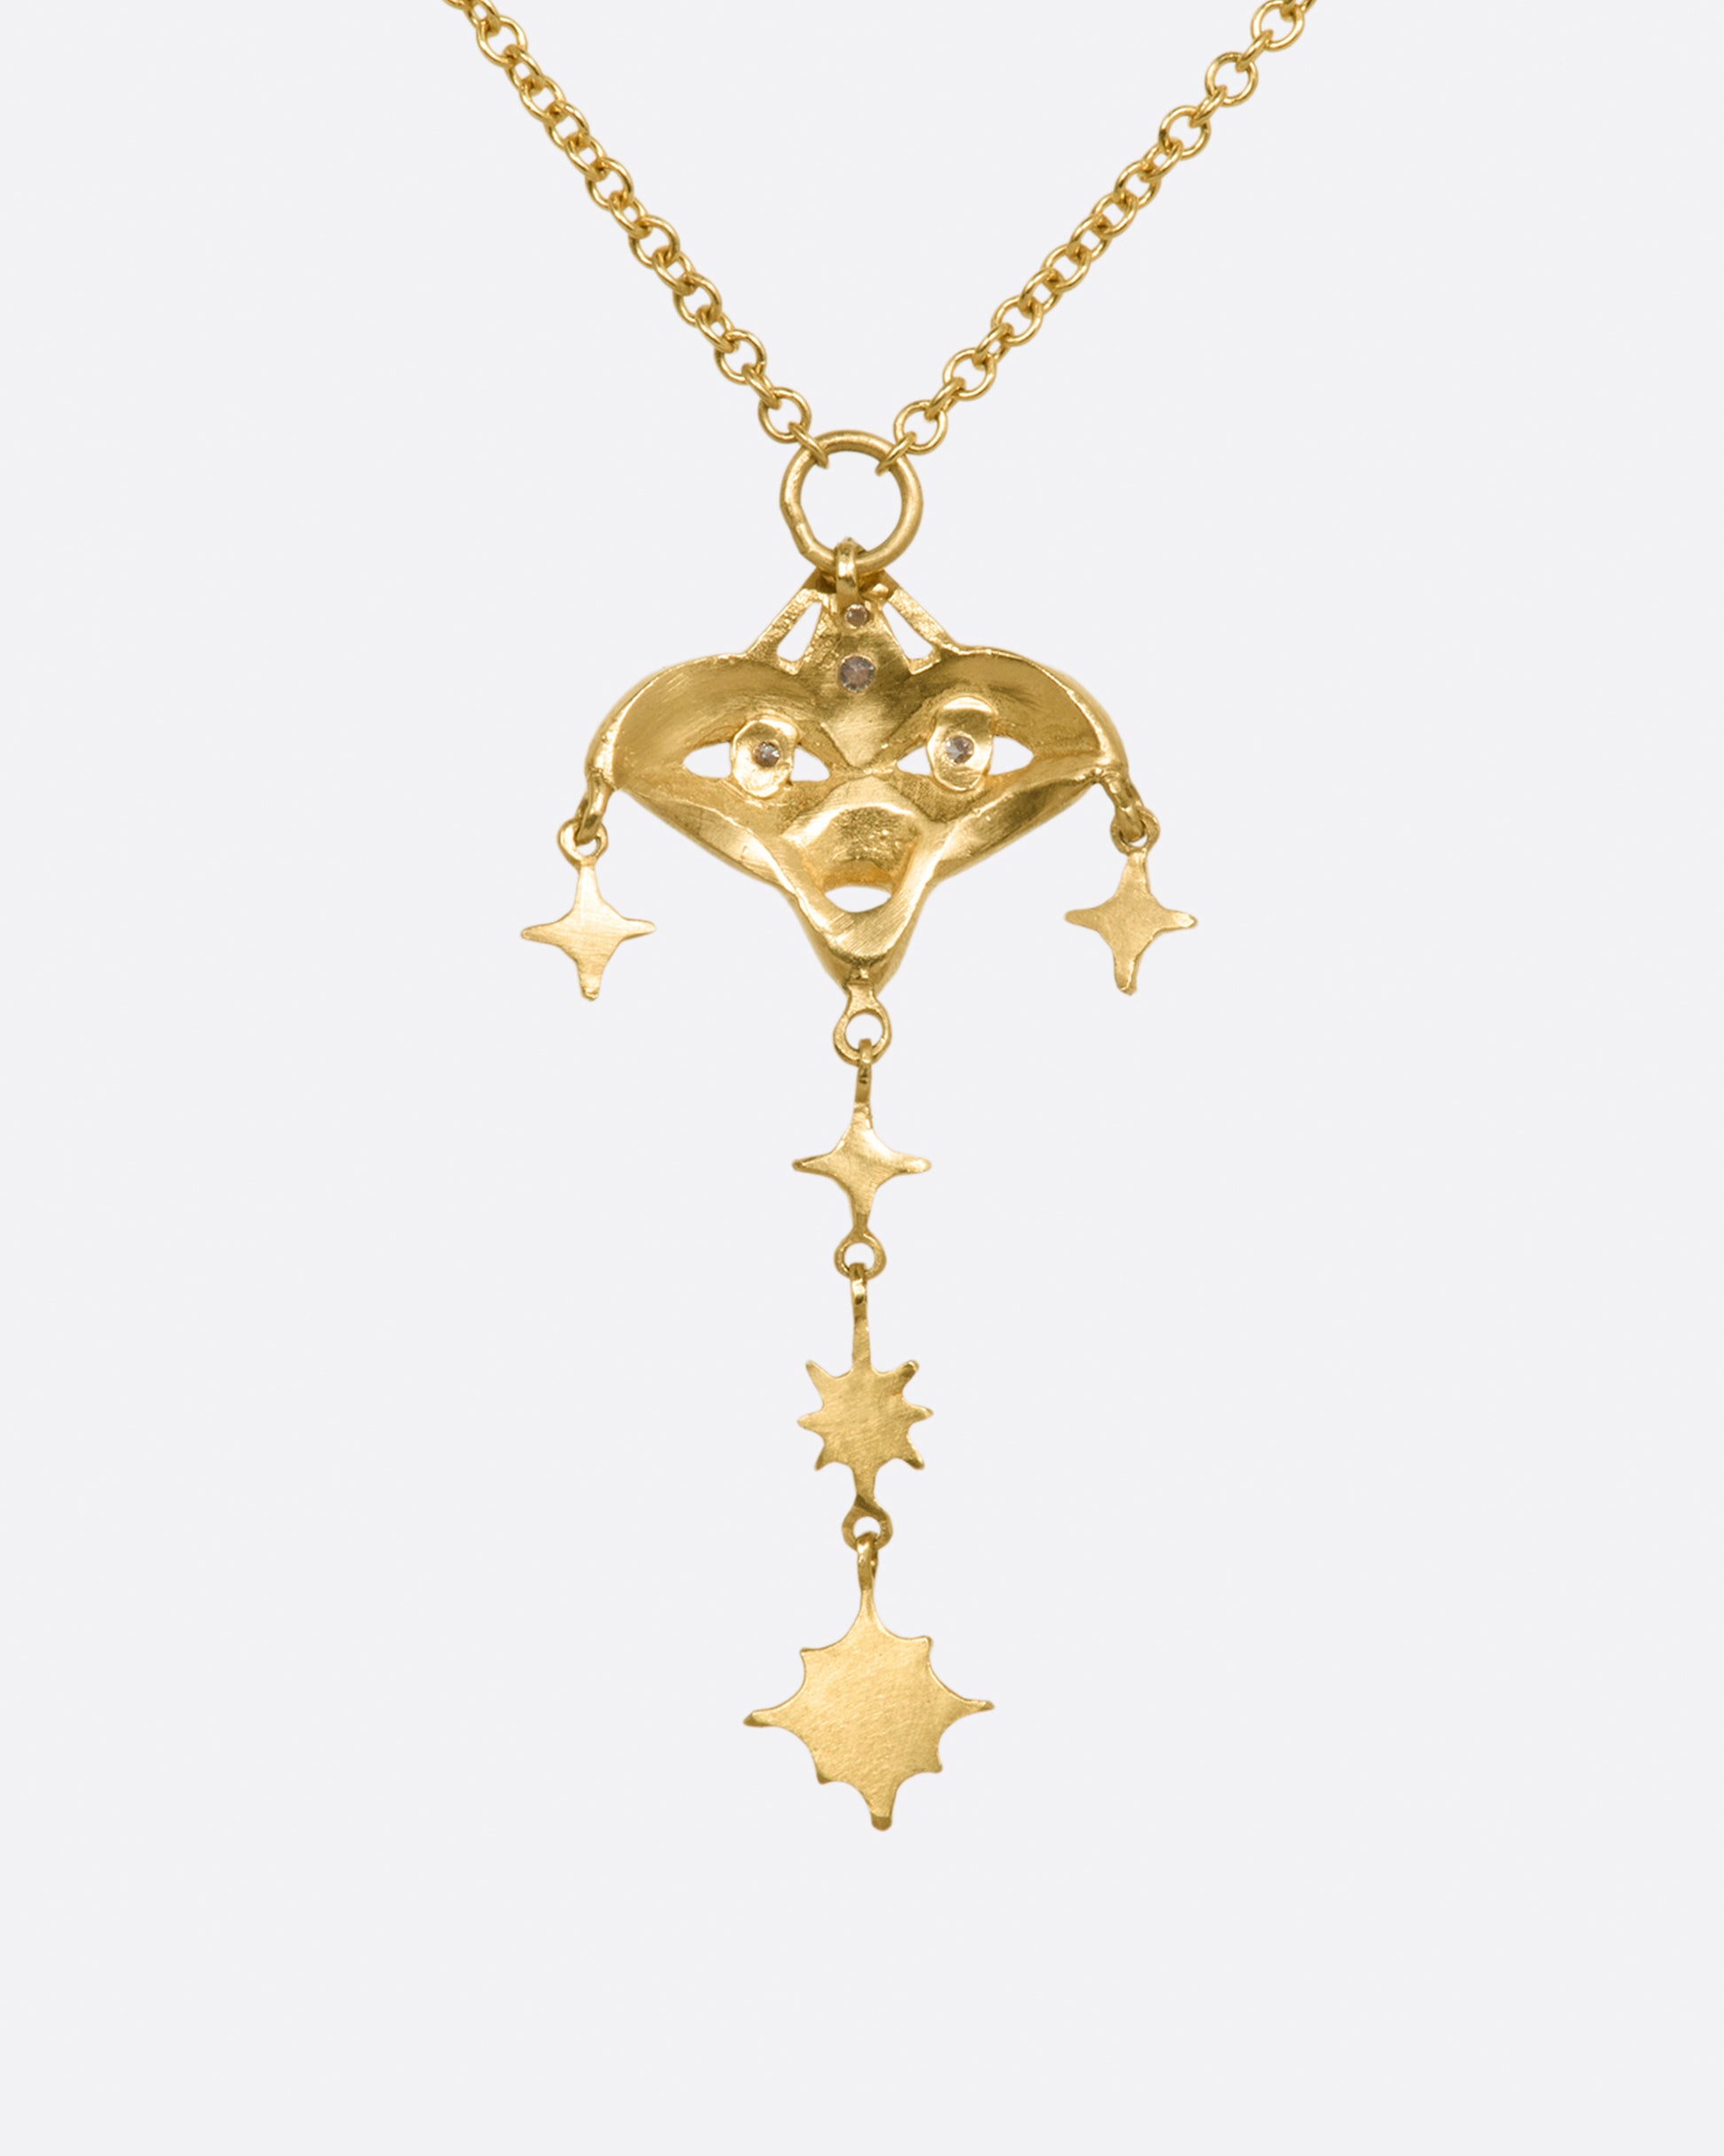 A yellow gold necklace with a mask pendant with diamond eyes and various star dangles, shown from the back.